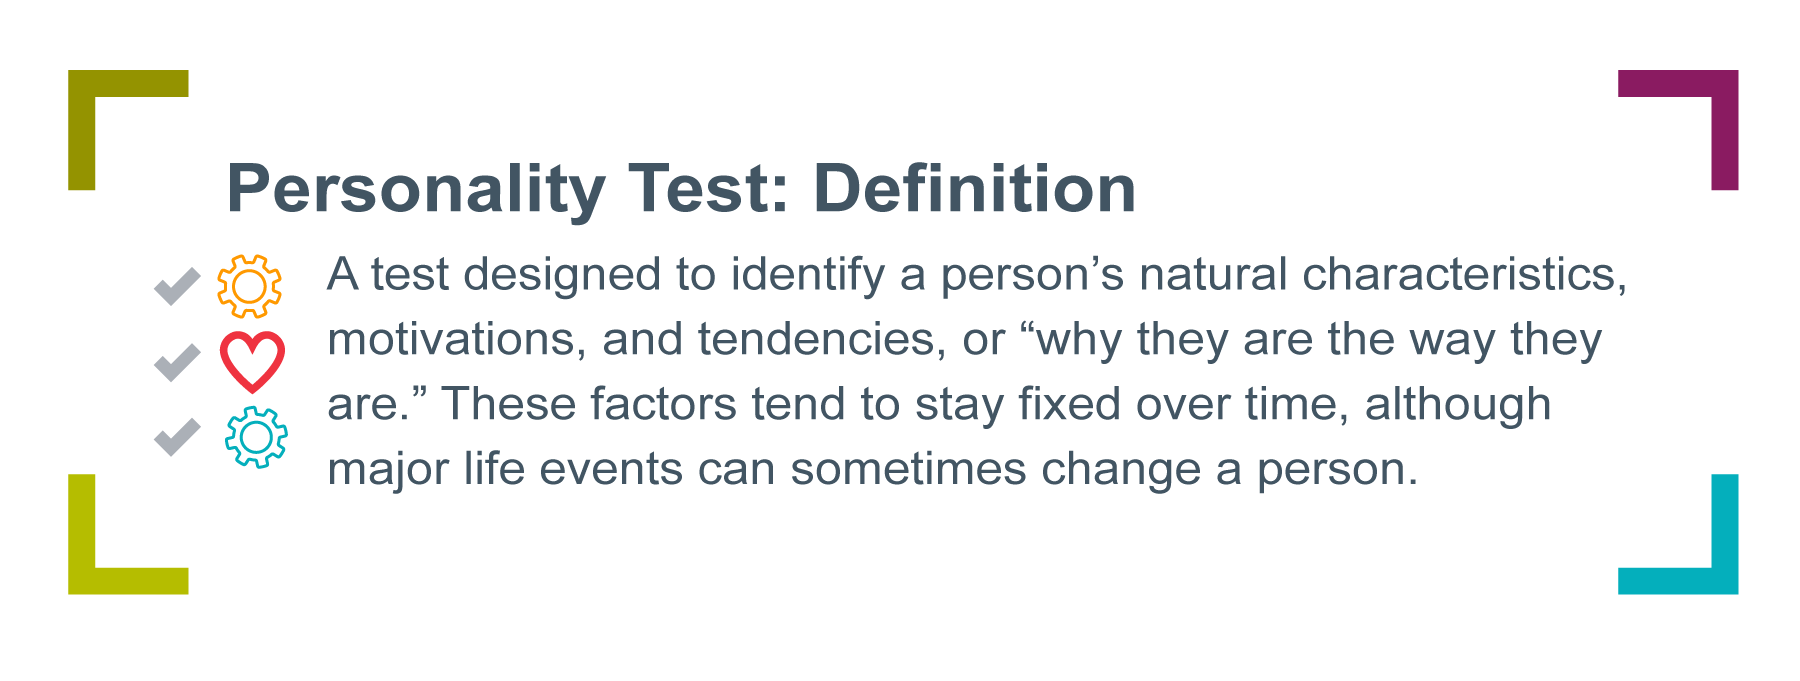 Graphic of the definition of a personality test for leaders. Includes icons of two gears and heart, each with checkmarks by them. text says 